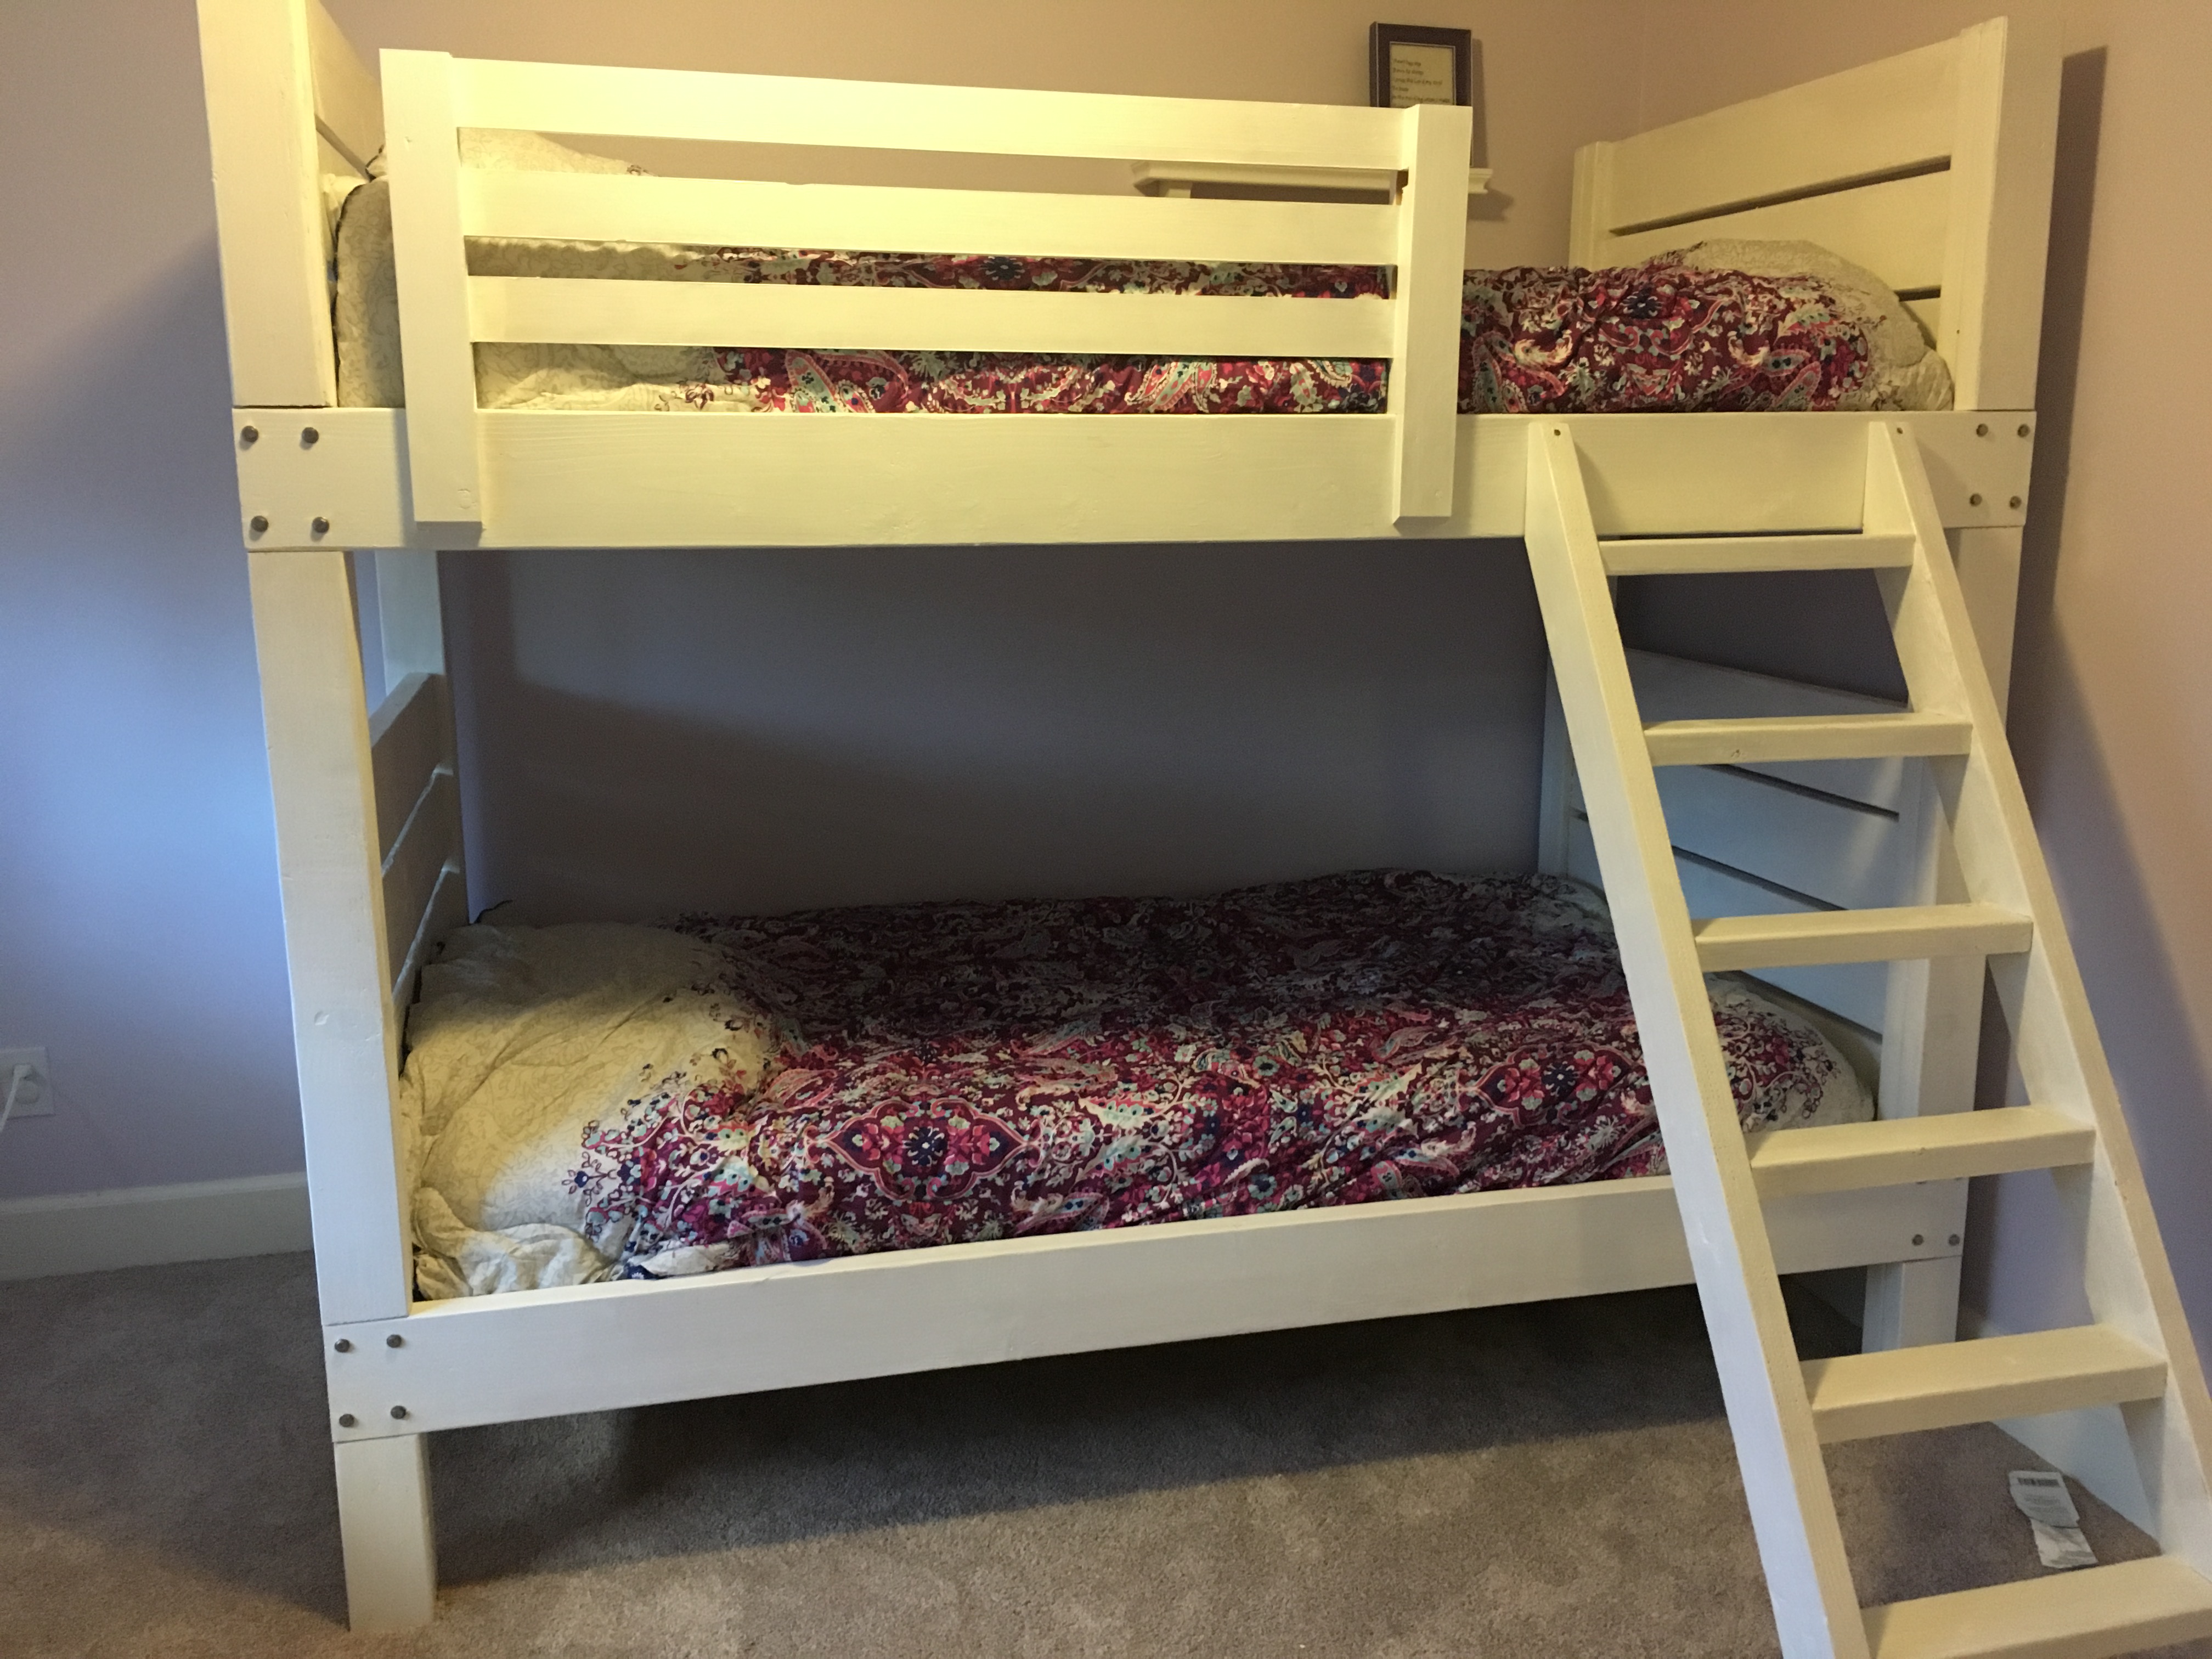 white bunk beds including mattresses